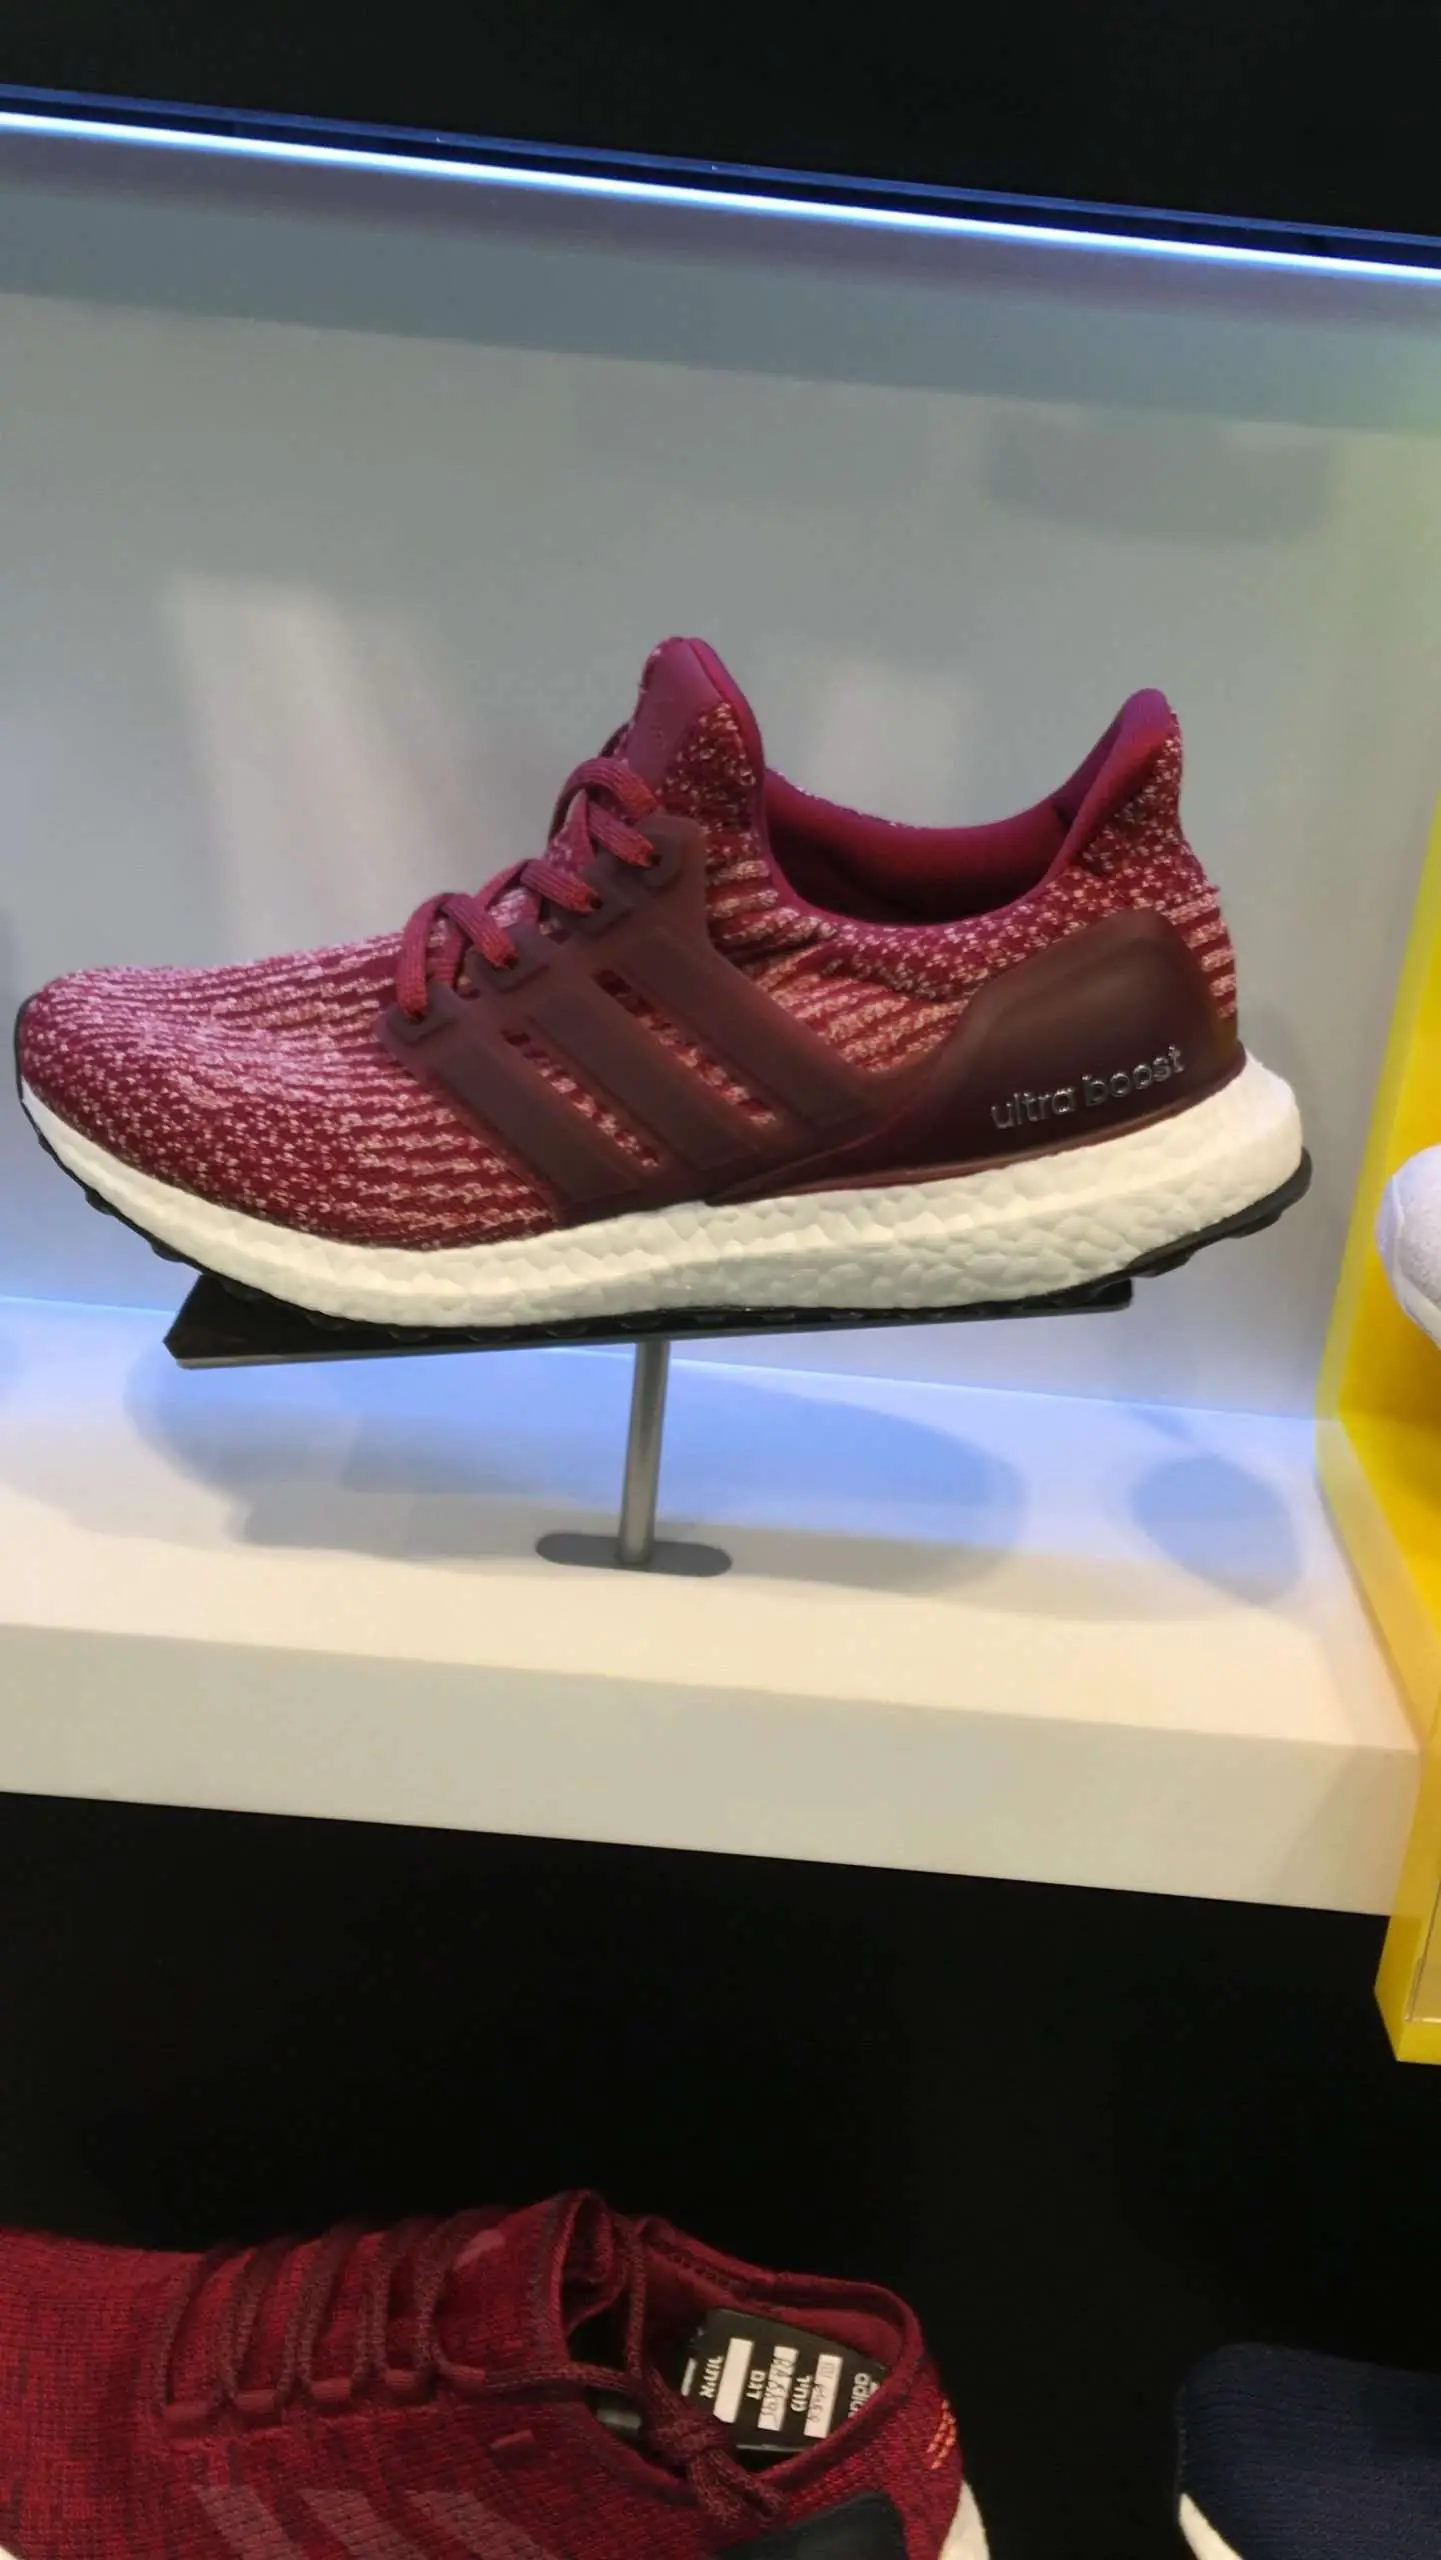 Saw those in an adidas store someone knows whats theyre ...